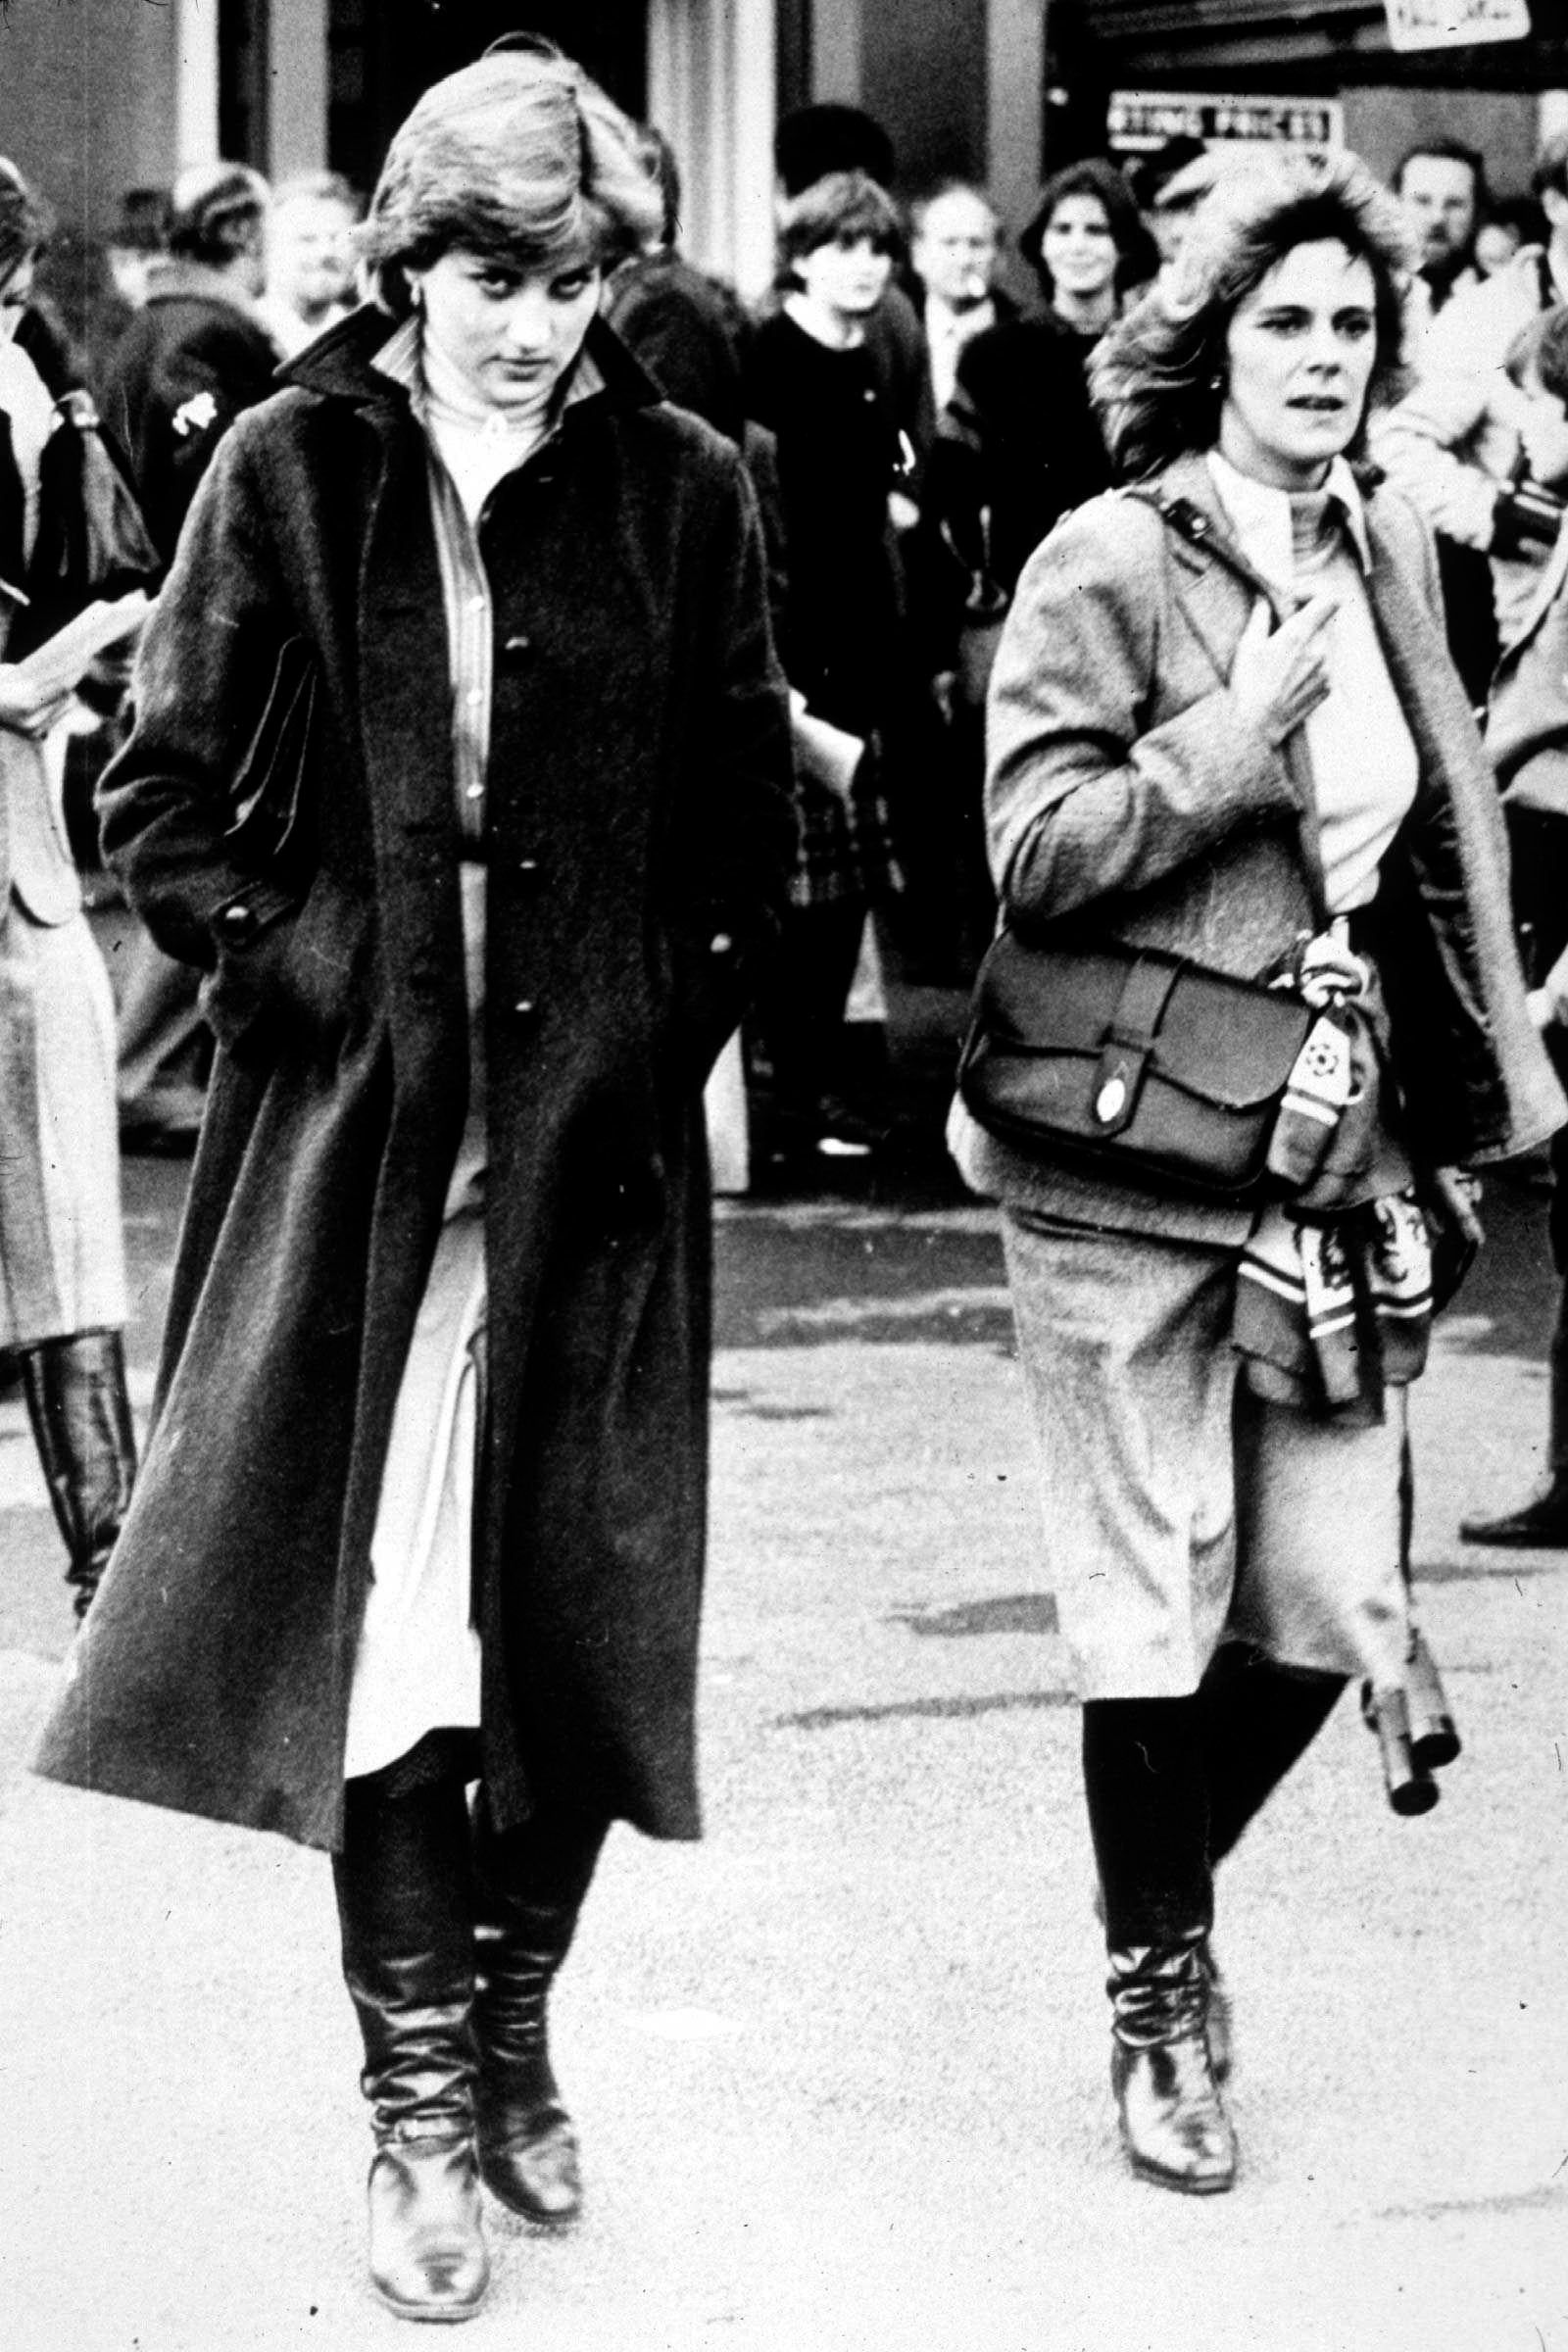 Lady Diana Spencer and Camilla Parker Bowles at Ludlow Races, where Prince Charles was competing, in 1980